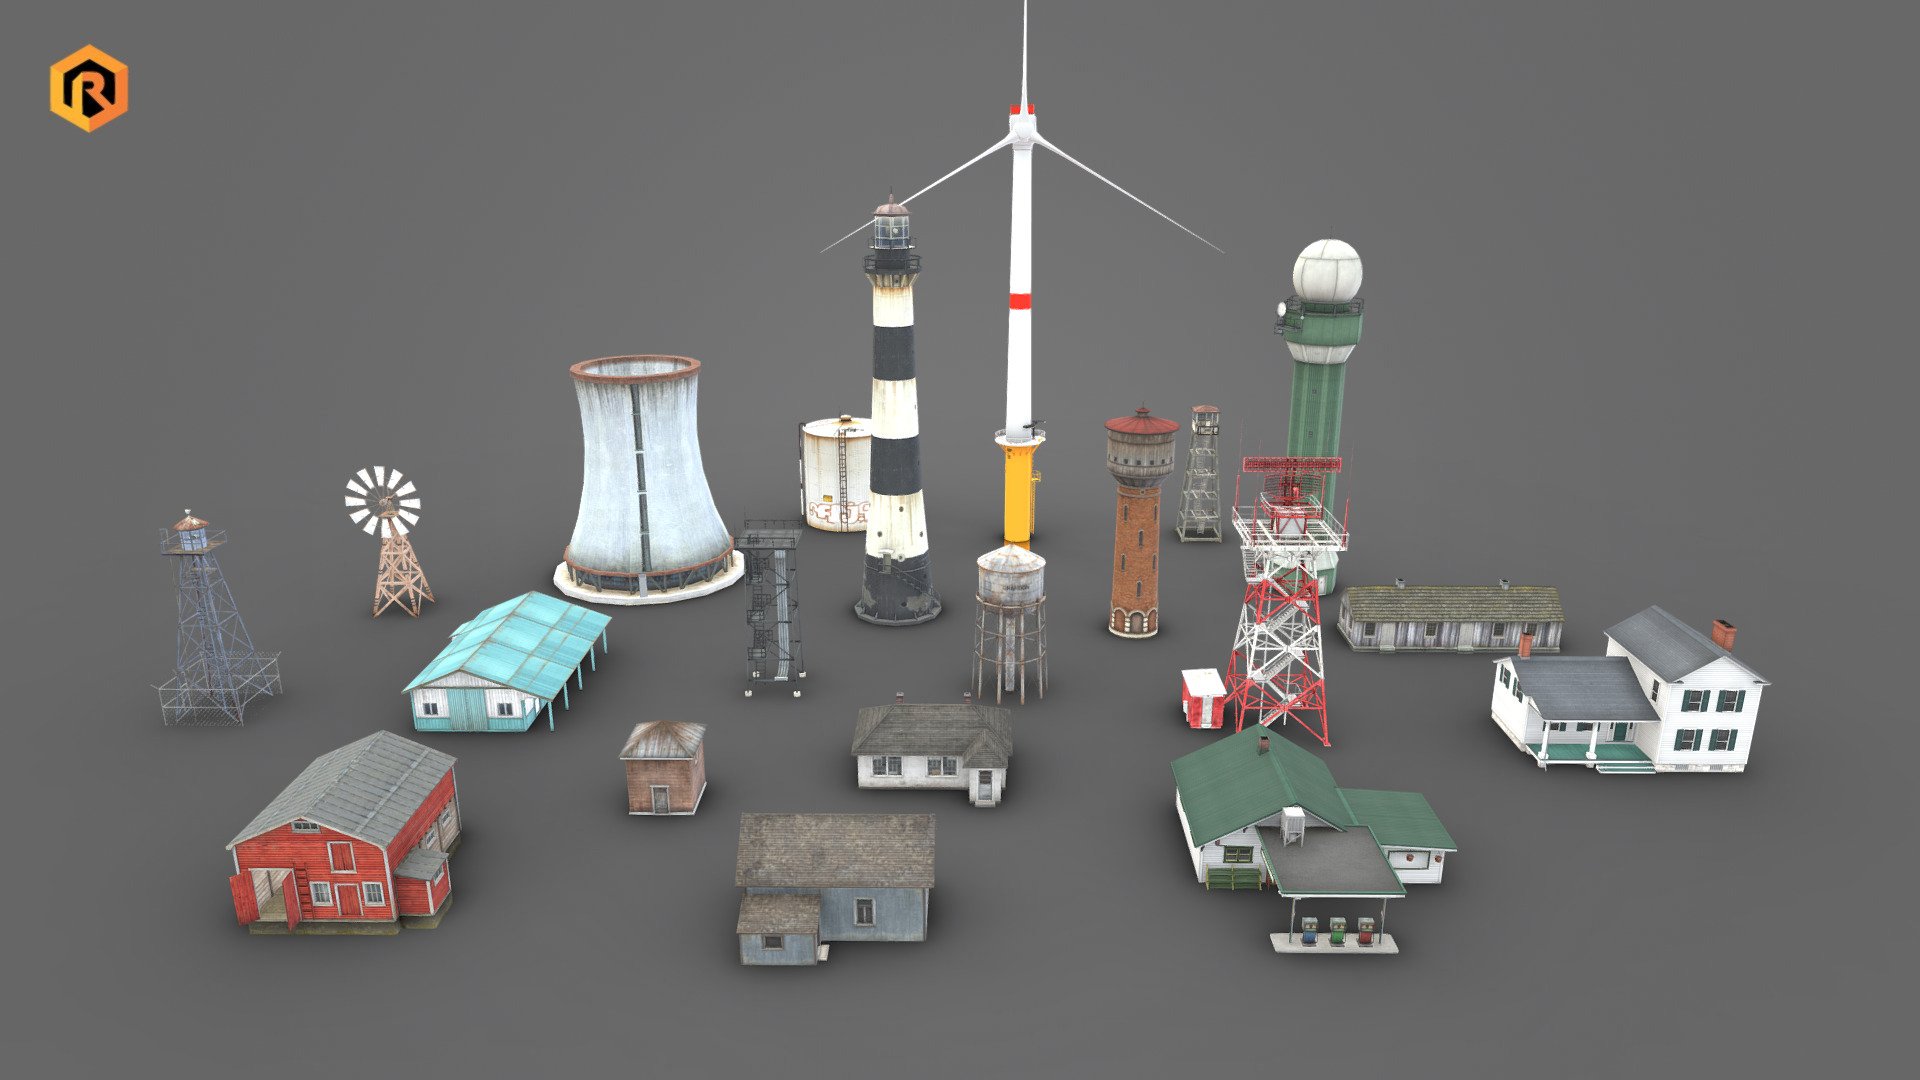 The collection contains 20 low-poly 3d models of various types of buildings and structures.

There are some towers, windmills, residential and some industrial buildings in this package. 

These models are best for use in games and other VR / AR, real-time applications such as Unity or Unreal Engine. 

Technical details:




The whole collection contains about 38k tris.

Mostly 2048 up to 4096 Diffuse and AO textures per model.

Models are correctly divided into parts when needed.

Models are completely unwrapped.

Models are fully textured with all materials applied.

Lot of additional file formats included (Blender, Unity, Maya etc.)

More file formats are available in additional zip file on product page.

Please feel free to contact me if you have any questions or need any support for this asset.

Support e-mail: support@rescue3d.com - 20 Buildings & Structures Collection - Vol 2 - Buy Royalty Free 3D model by Rescue3D Assets (@rescue3d) 3d model